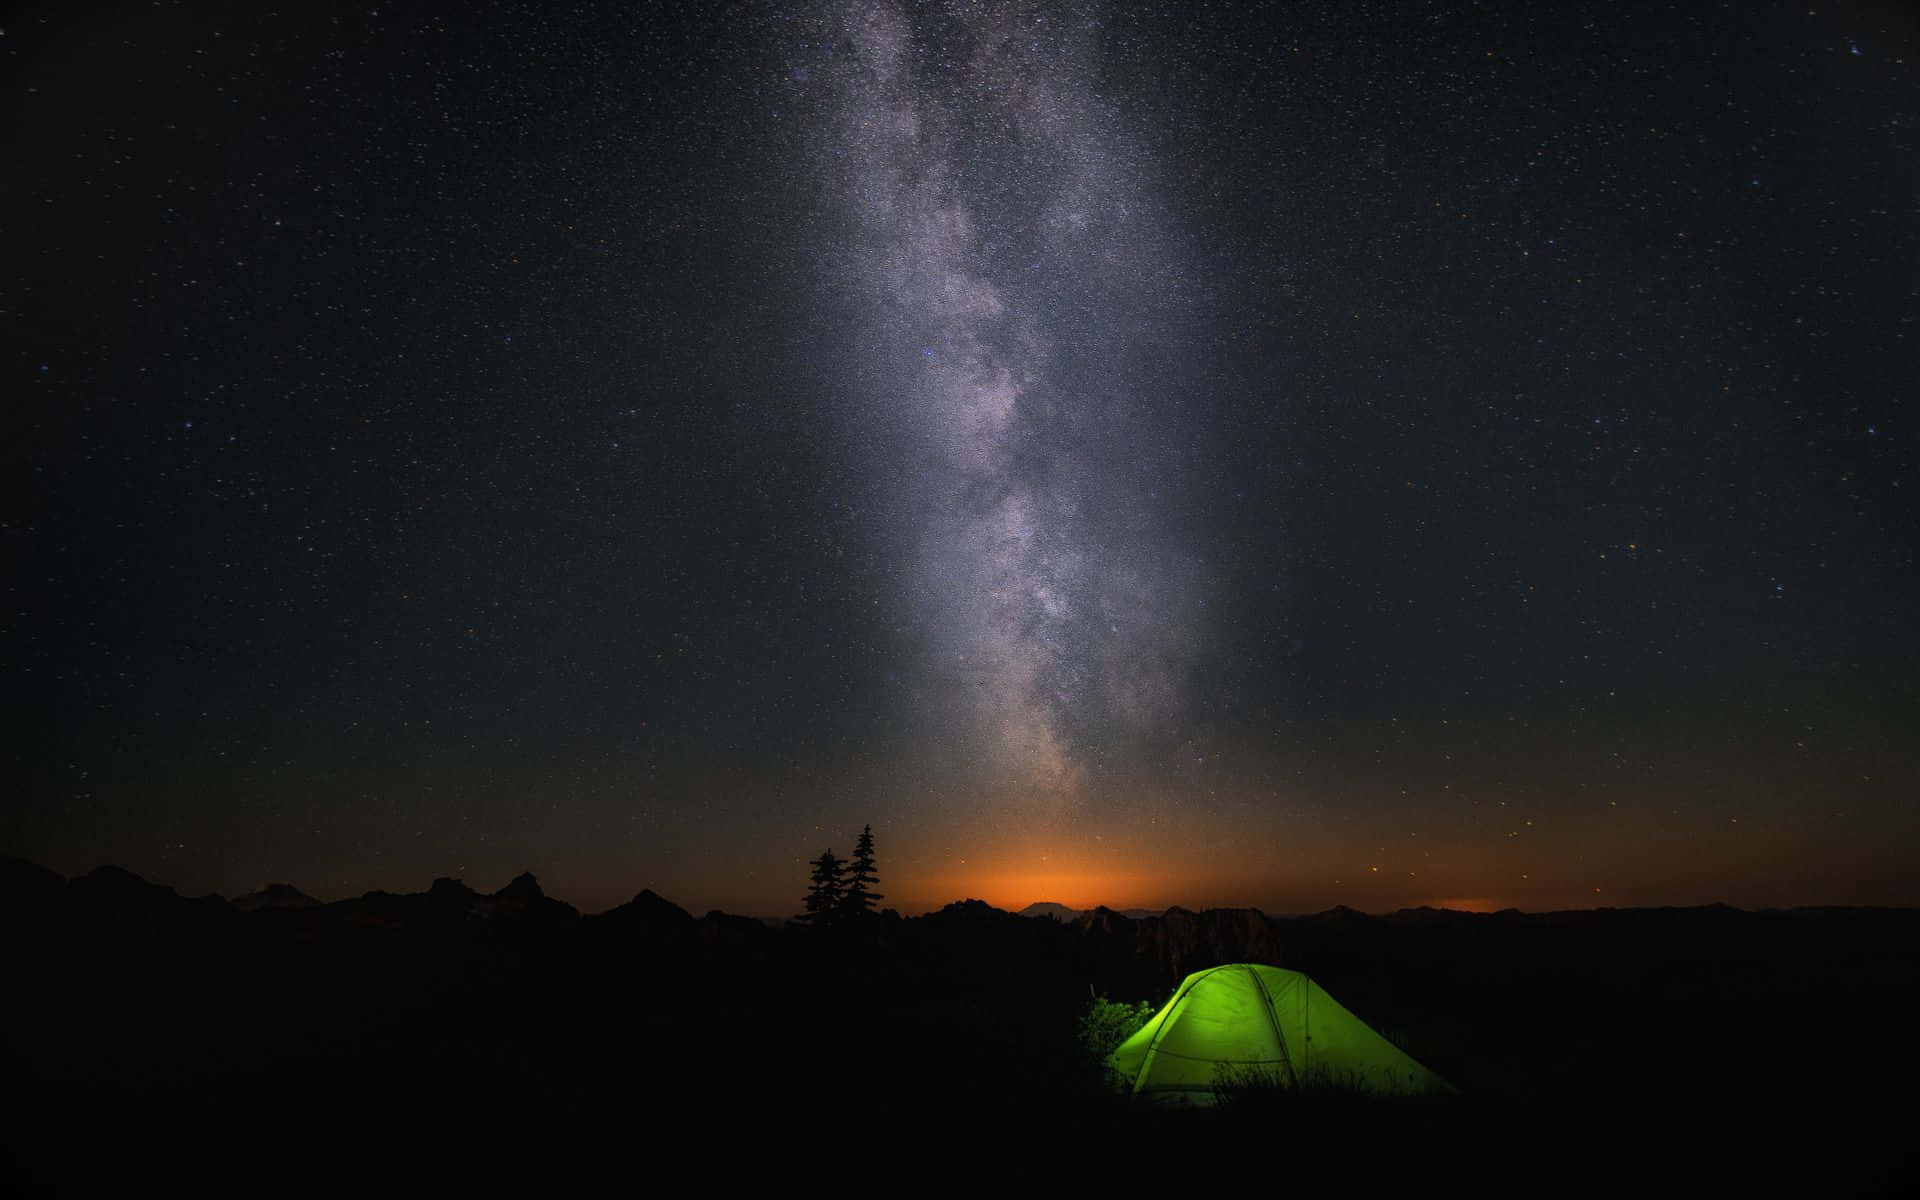 A Green Tent Under The Milky